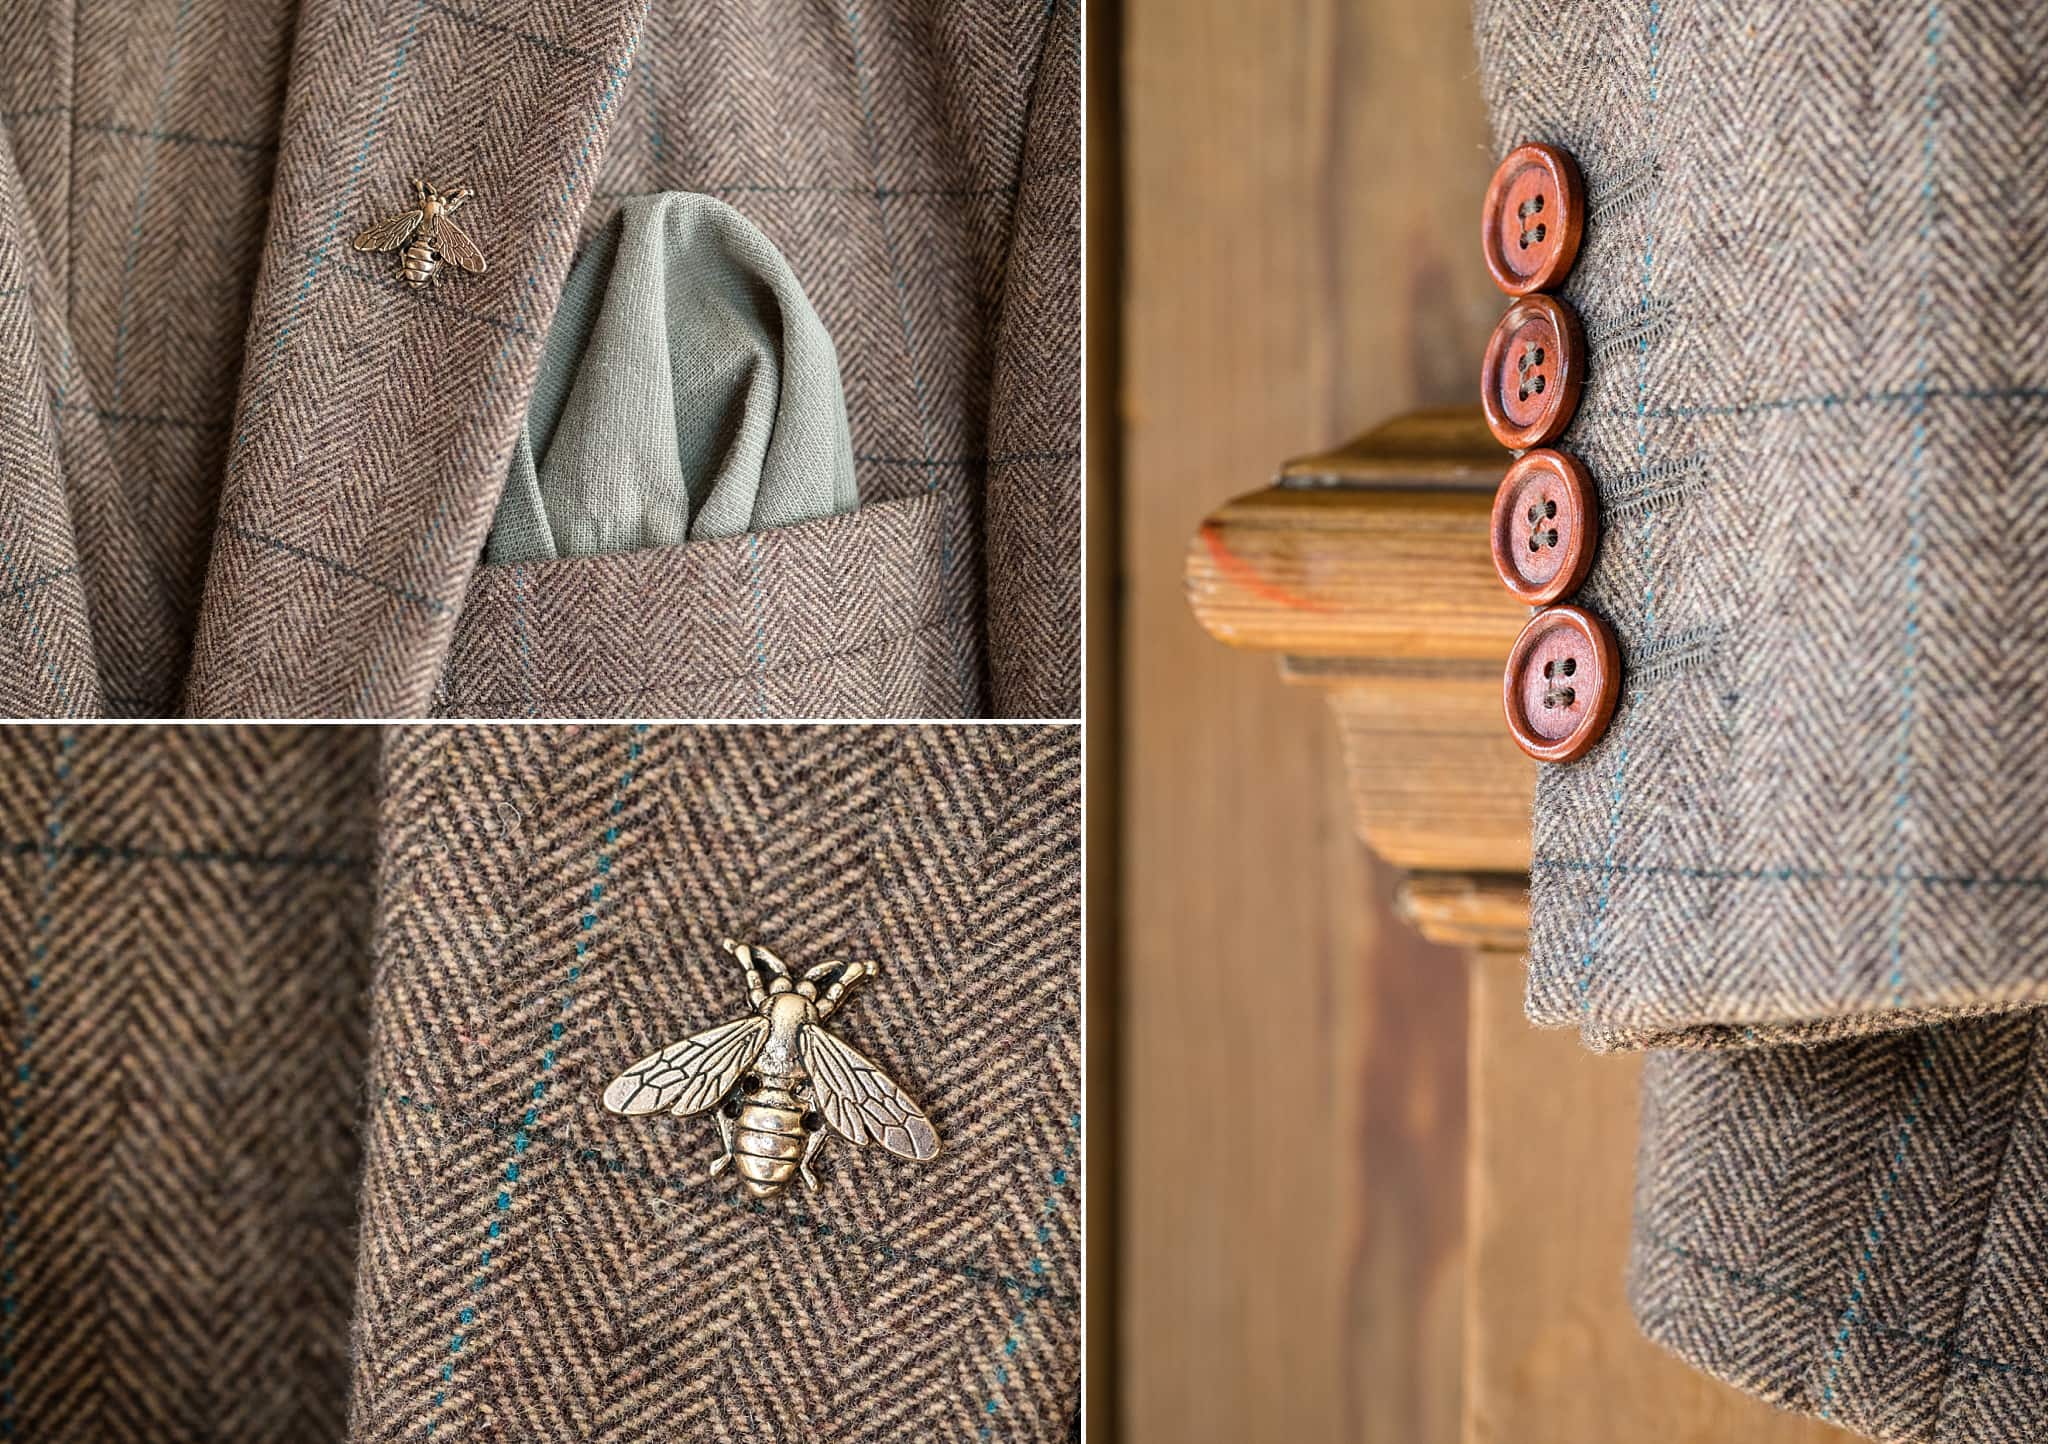 Close up shots showing button, pocket square and lapel pin details on the groom's suit